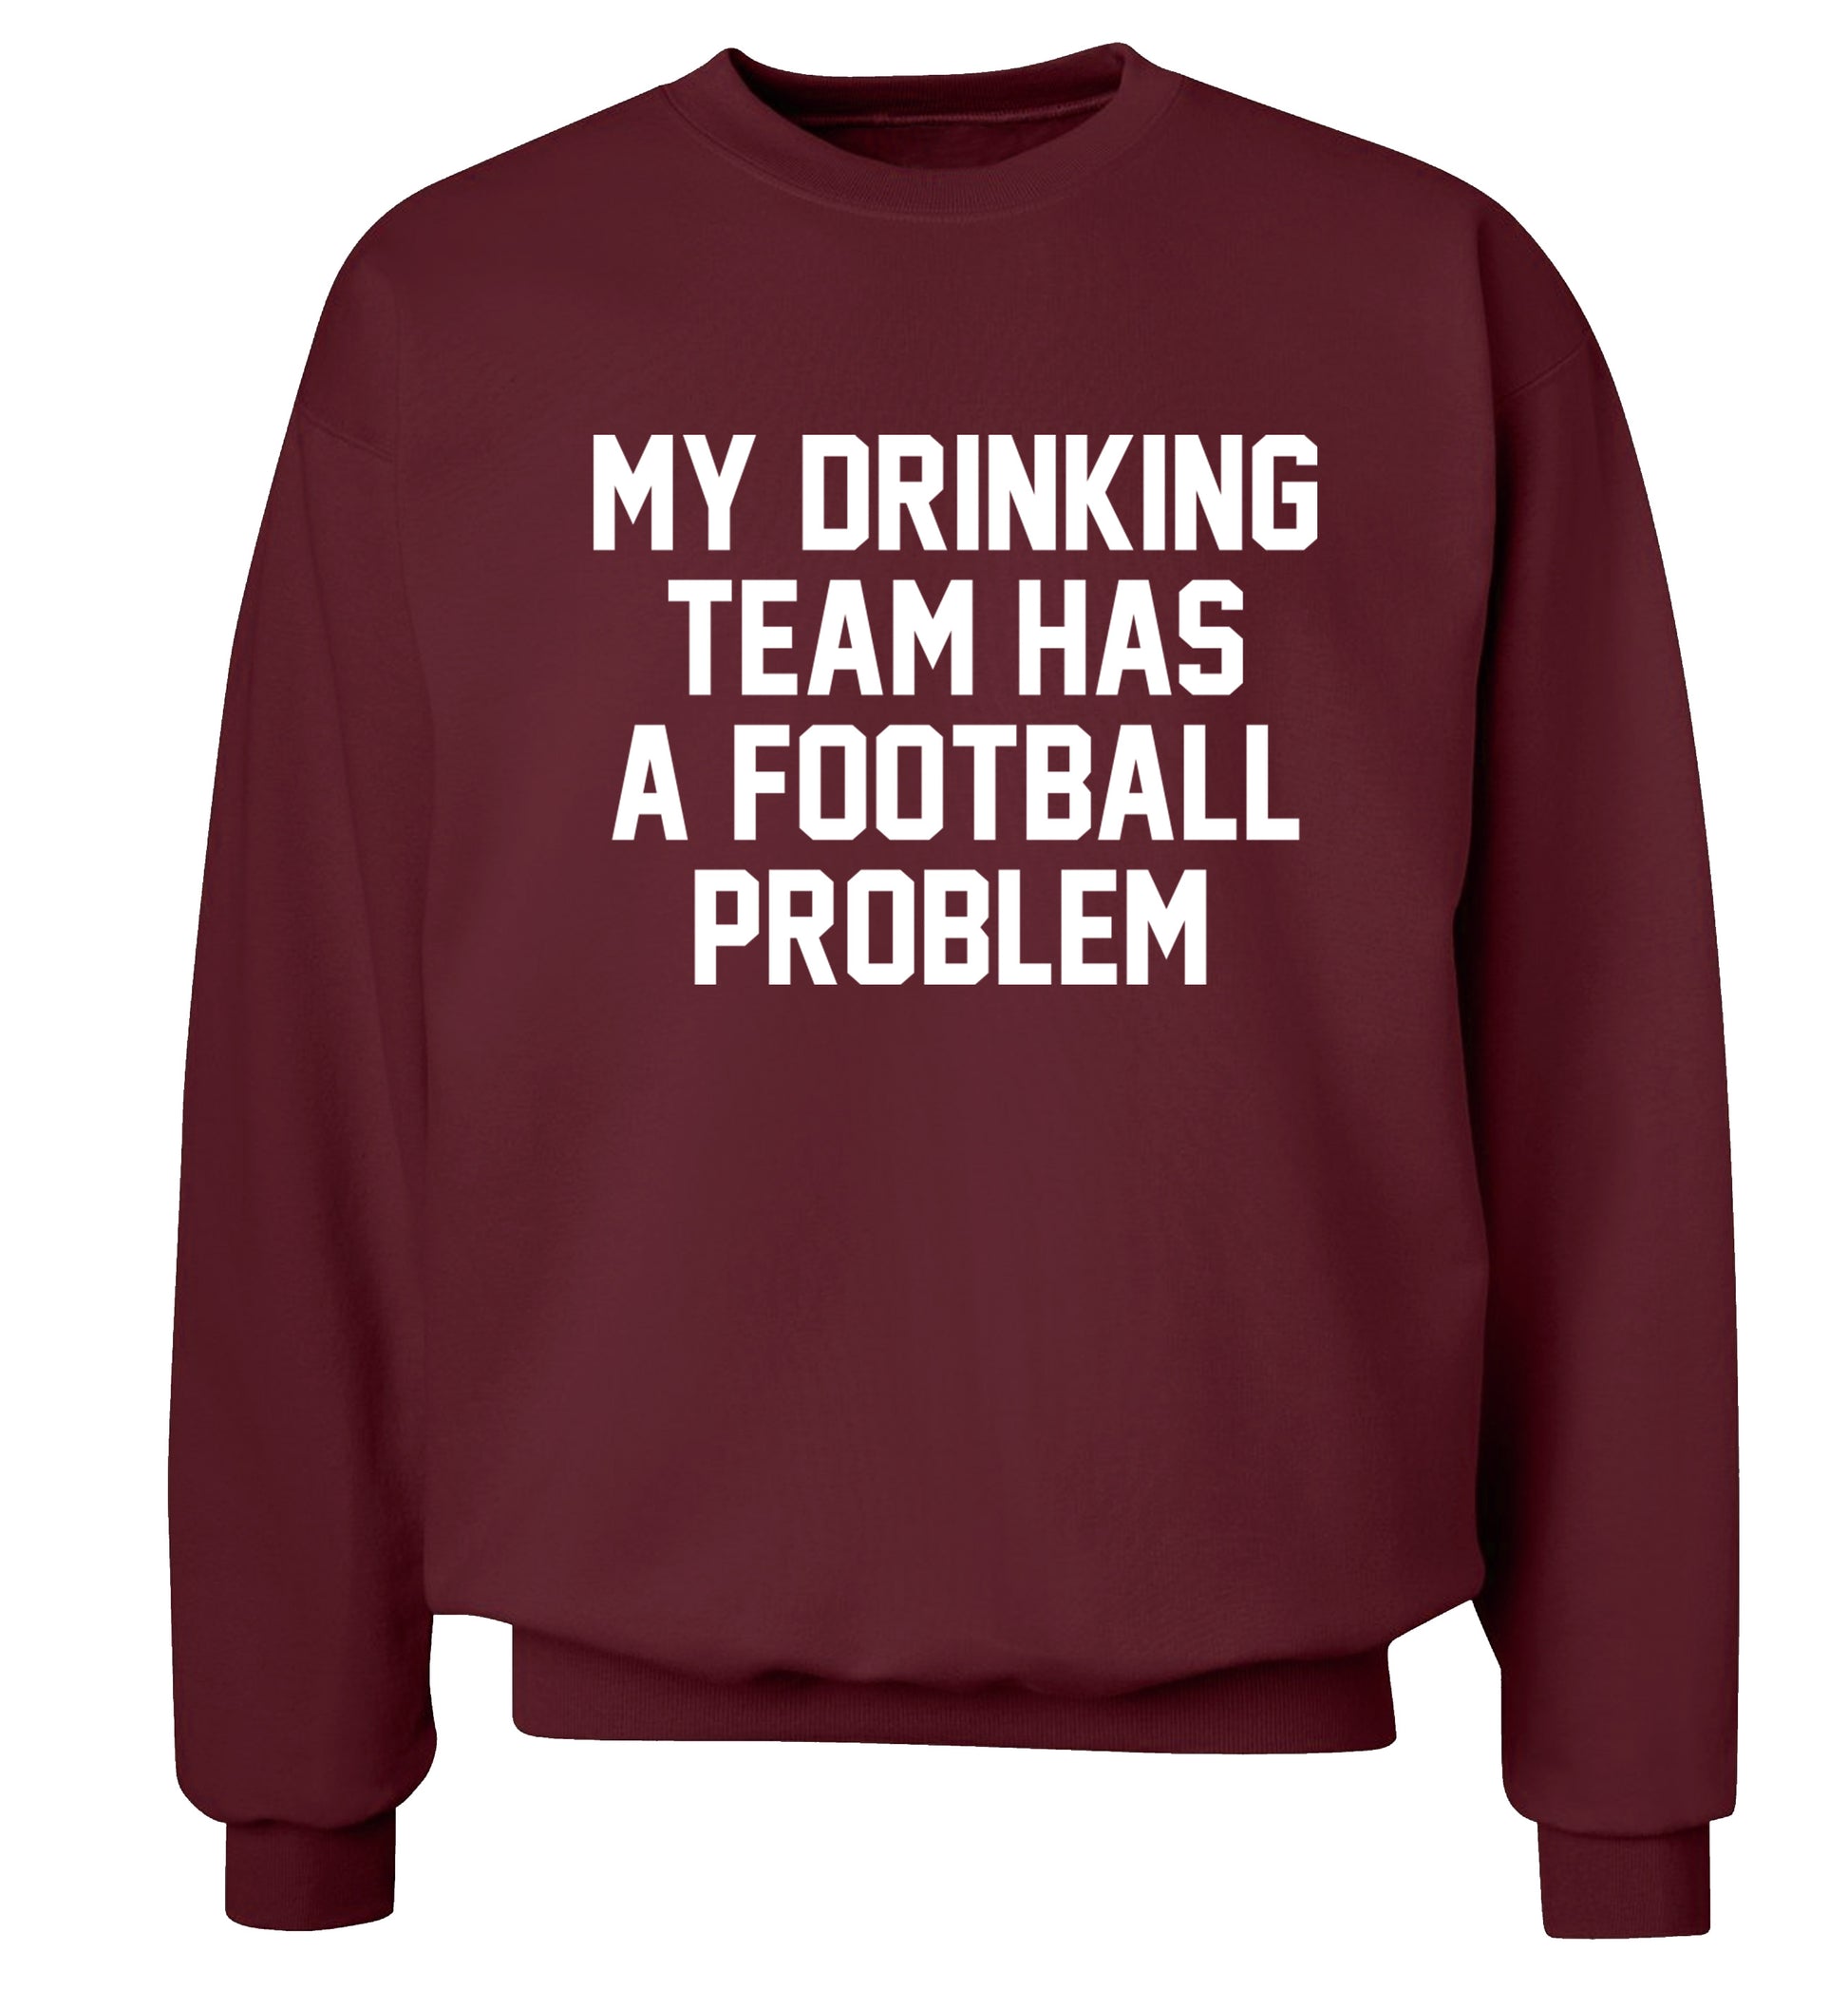 My drinking team has a football problem! Adult's unisexmaroon Sweater 2XL